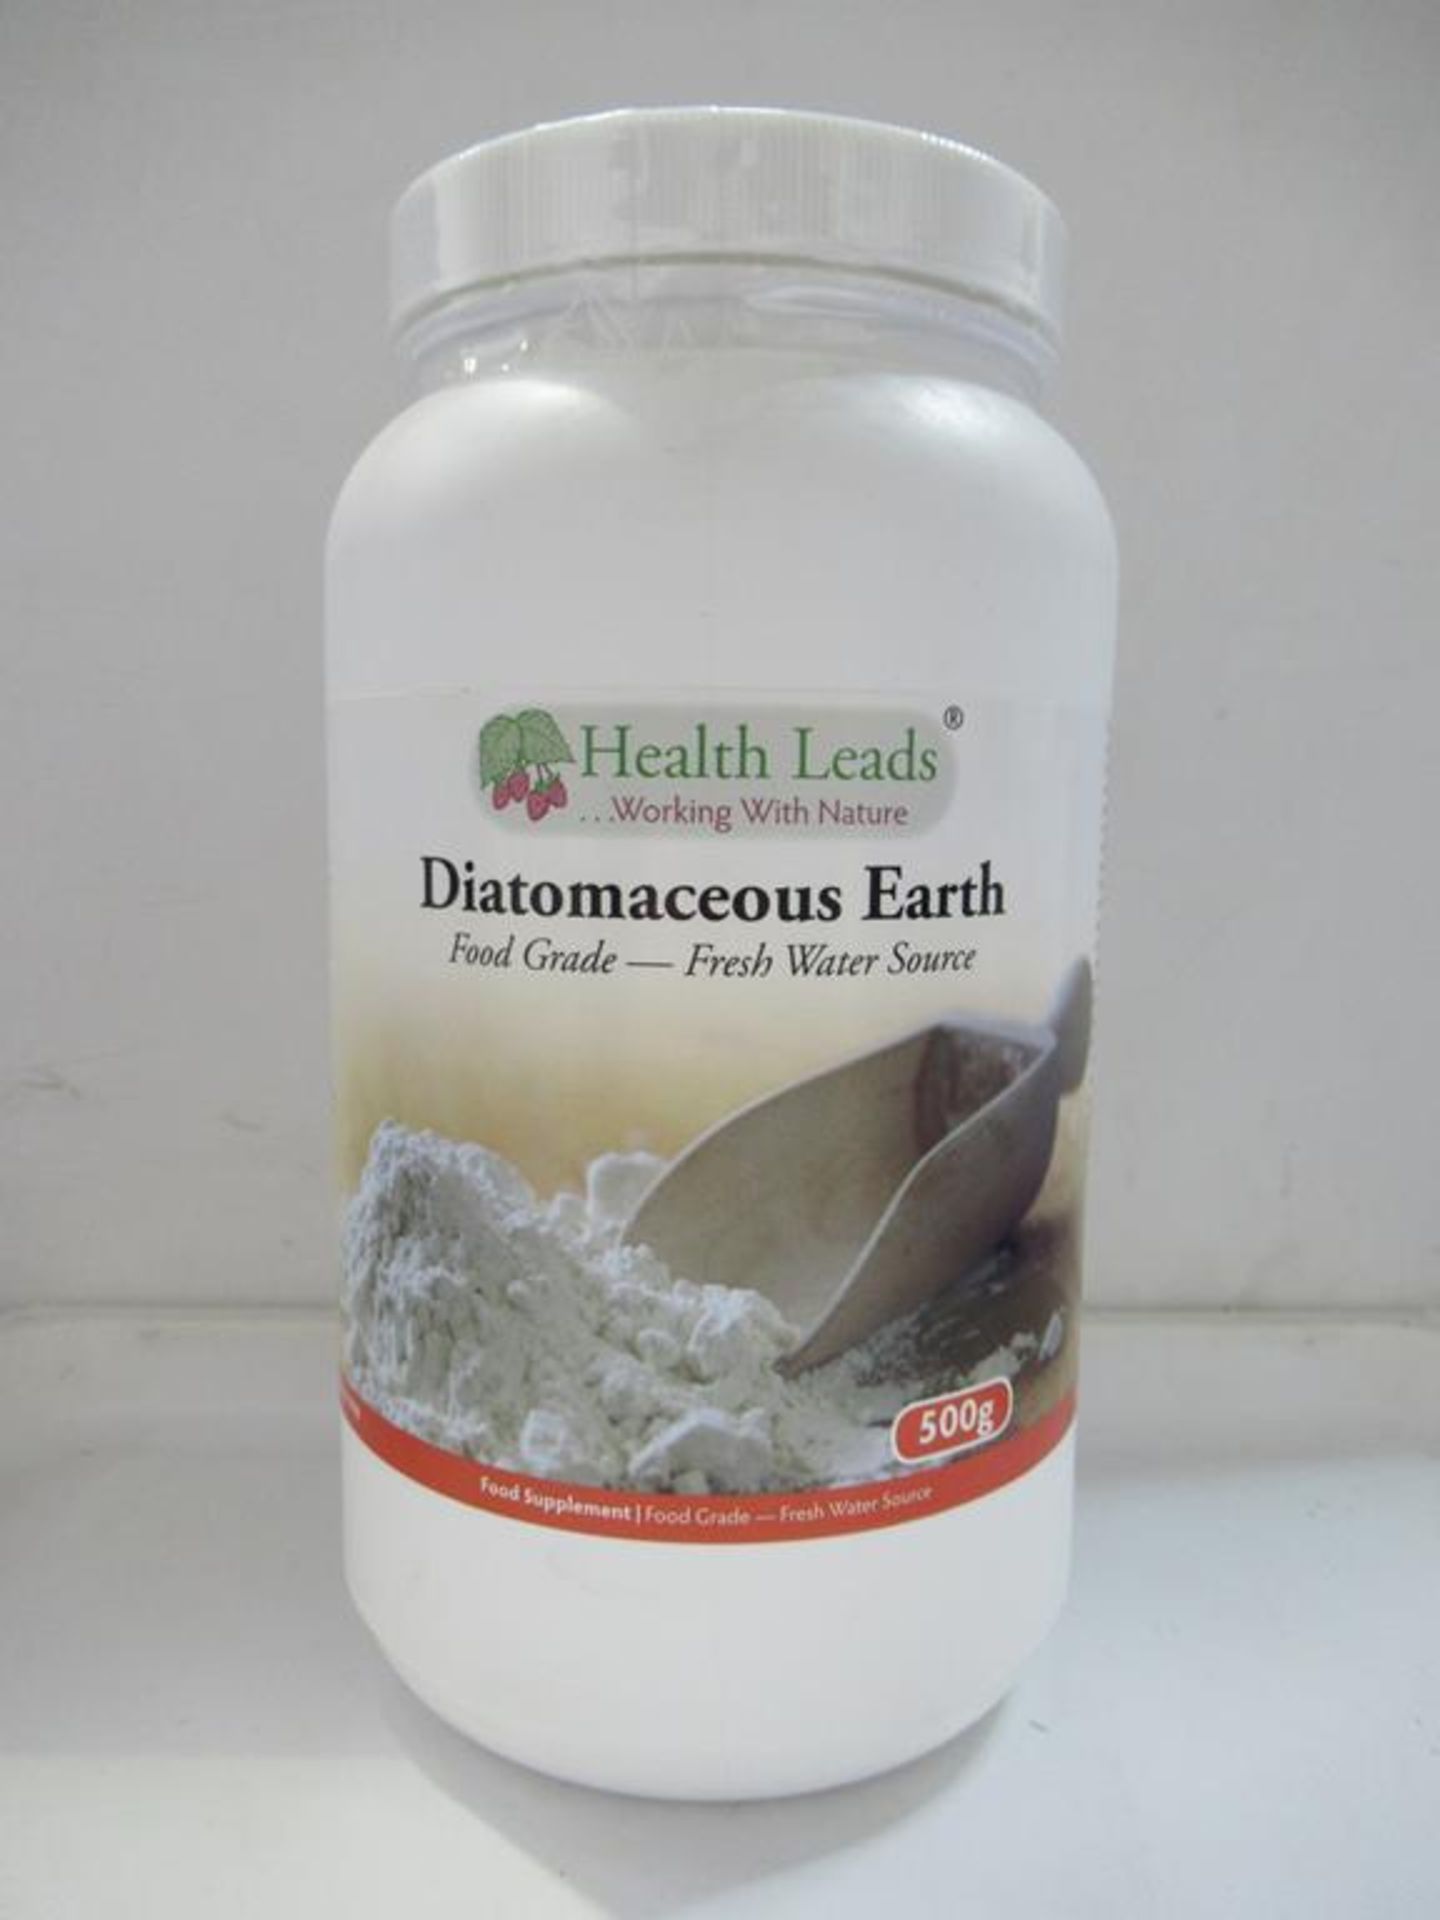 9 containers of Health Leads Diatomaceous Earth- Food Grade - Fresh water source (total weight 4150g - Image 2 of 3